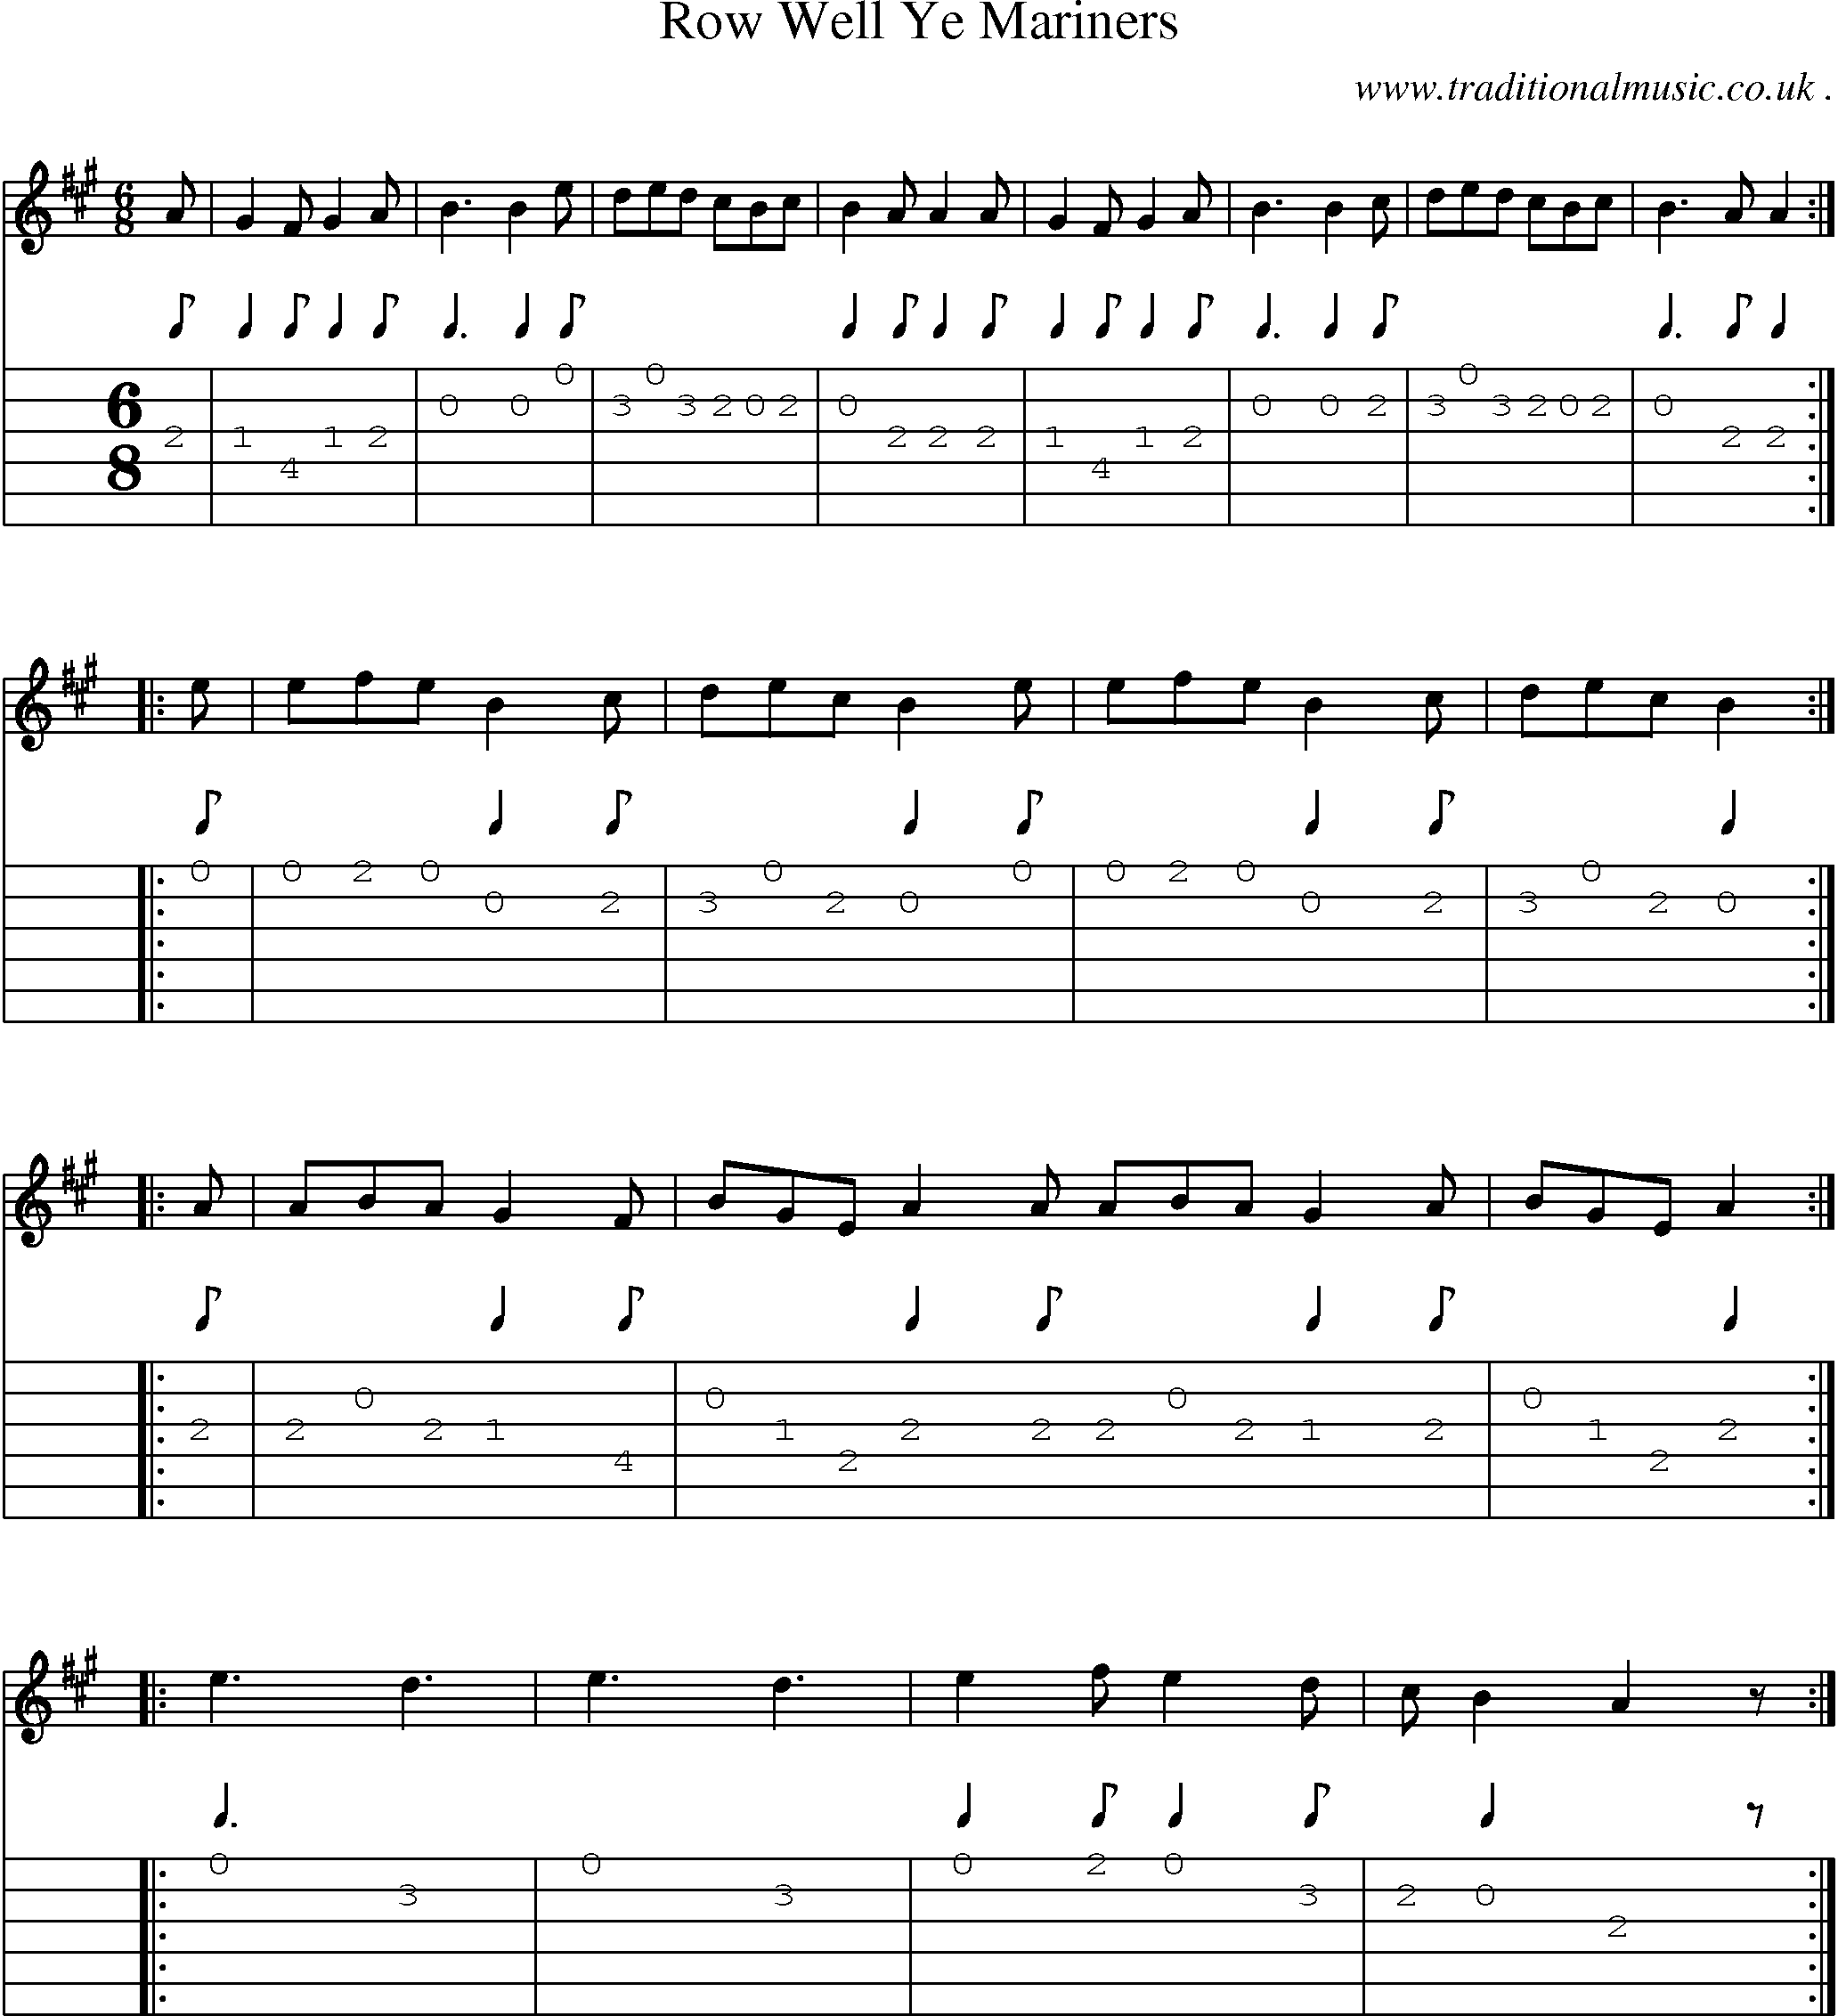 Sheet-Music and Guitar Tabs for Row Well Ye Mariners